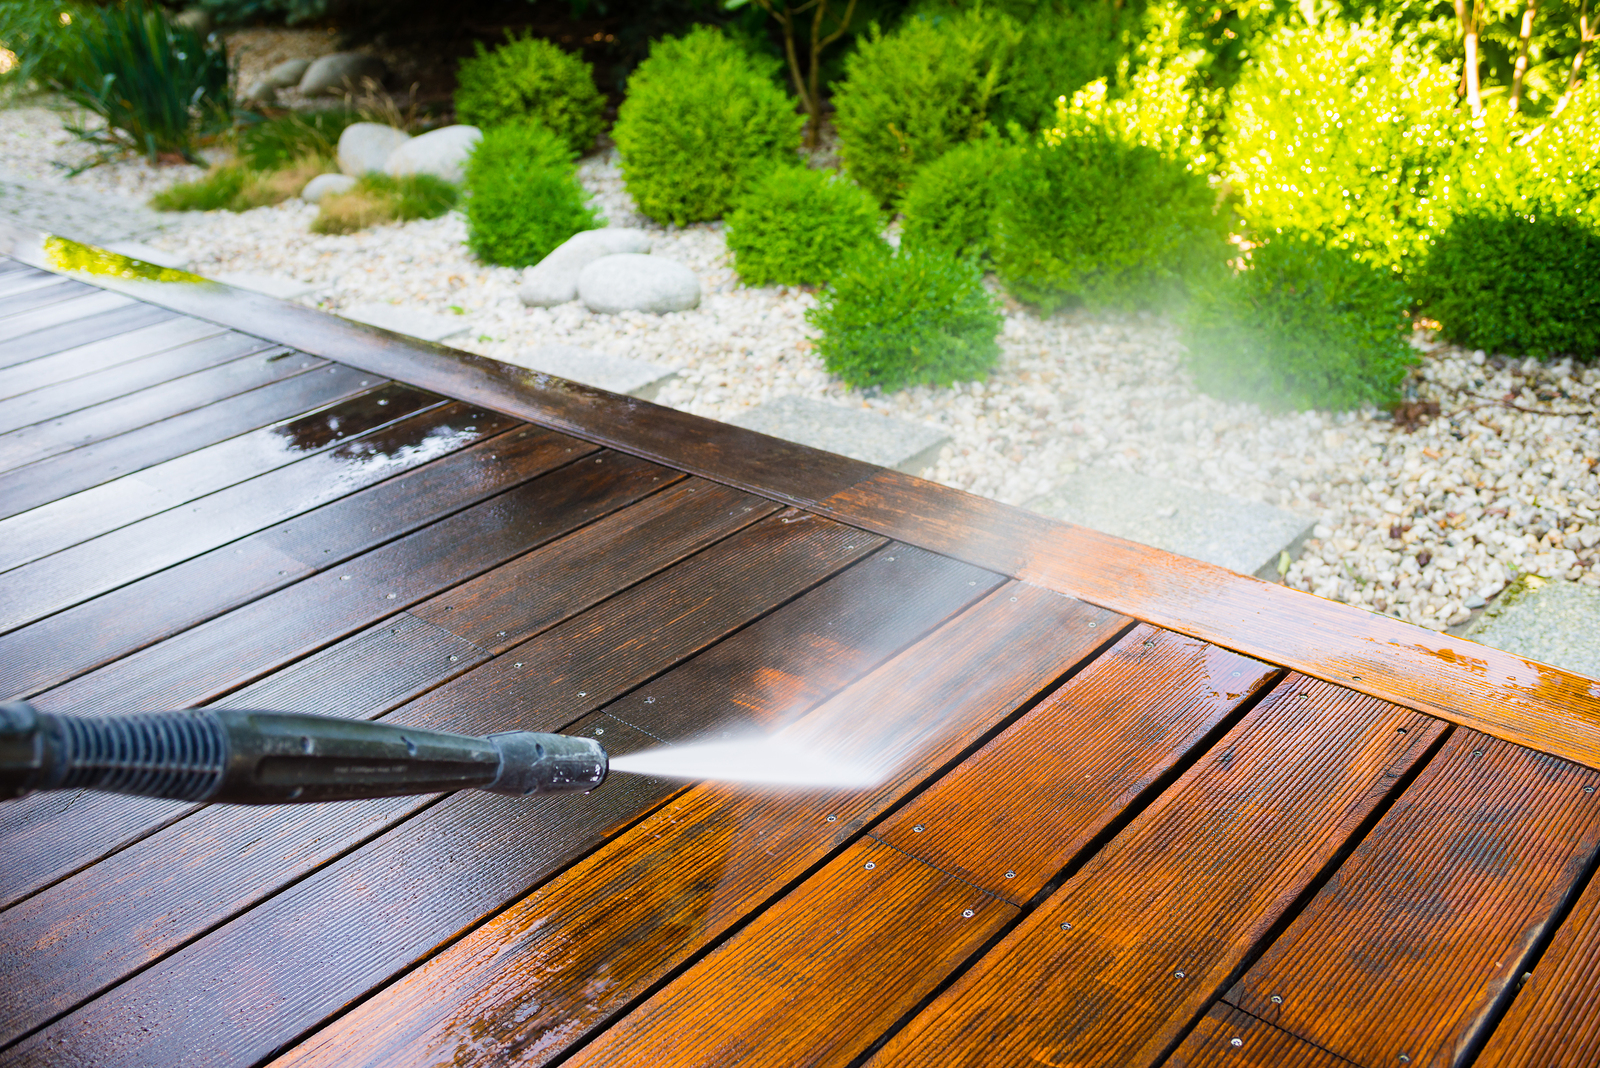 Power Washing Services in the Greater Mars, Butler, Cranberry & Saxonburg, PA areas